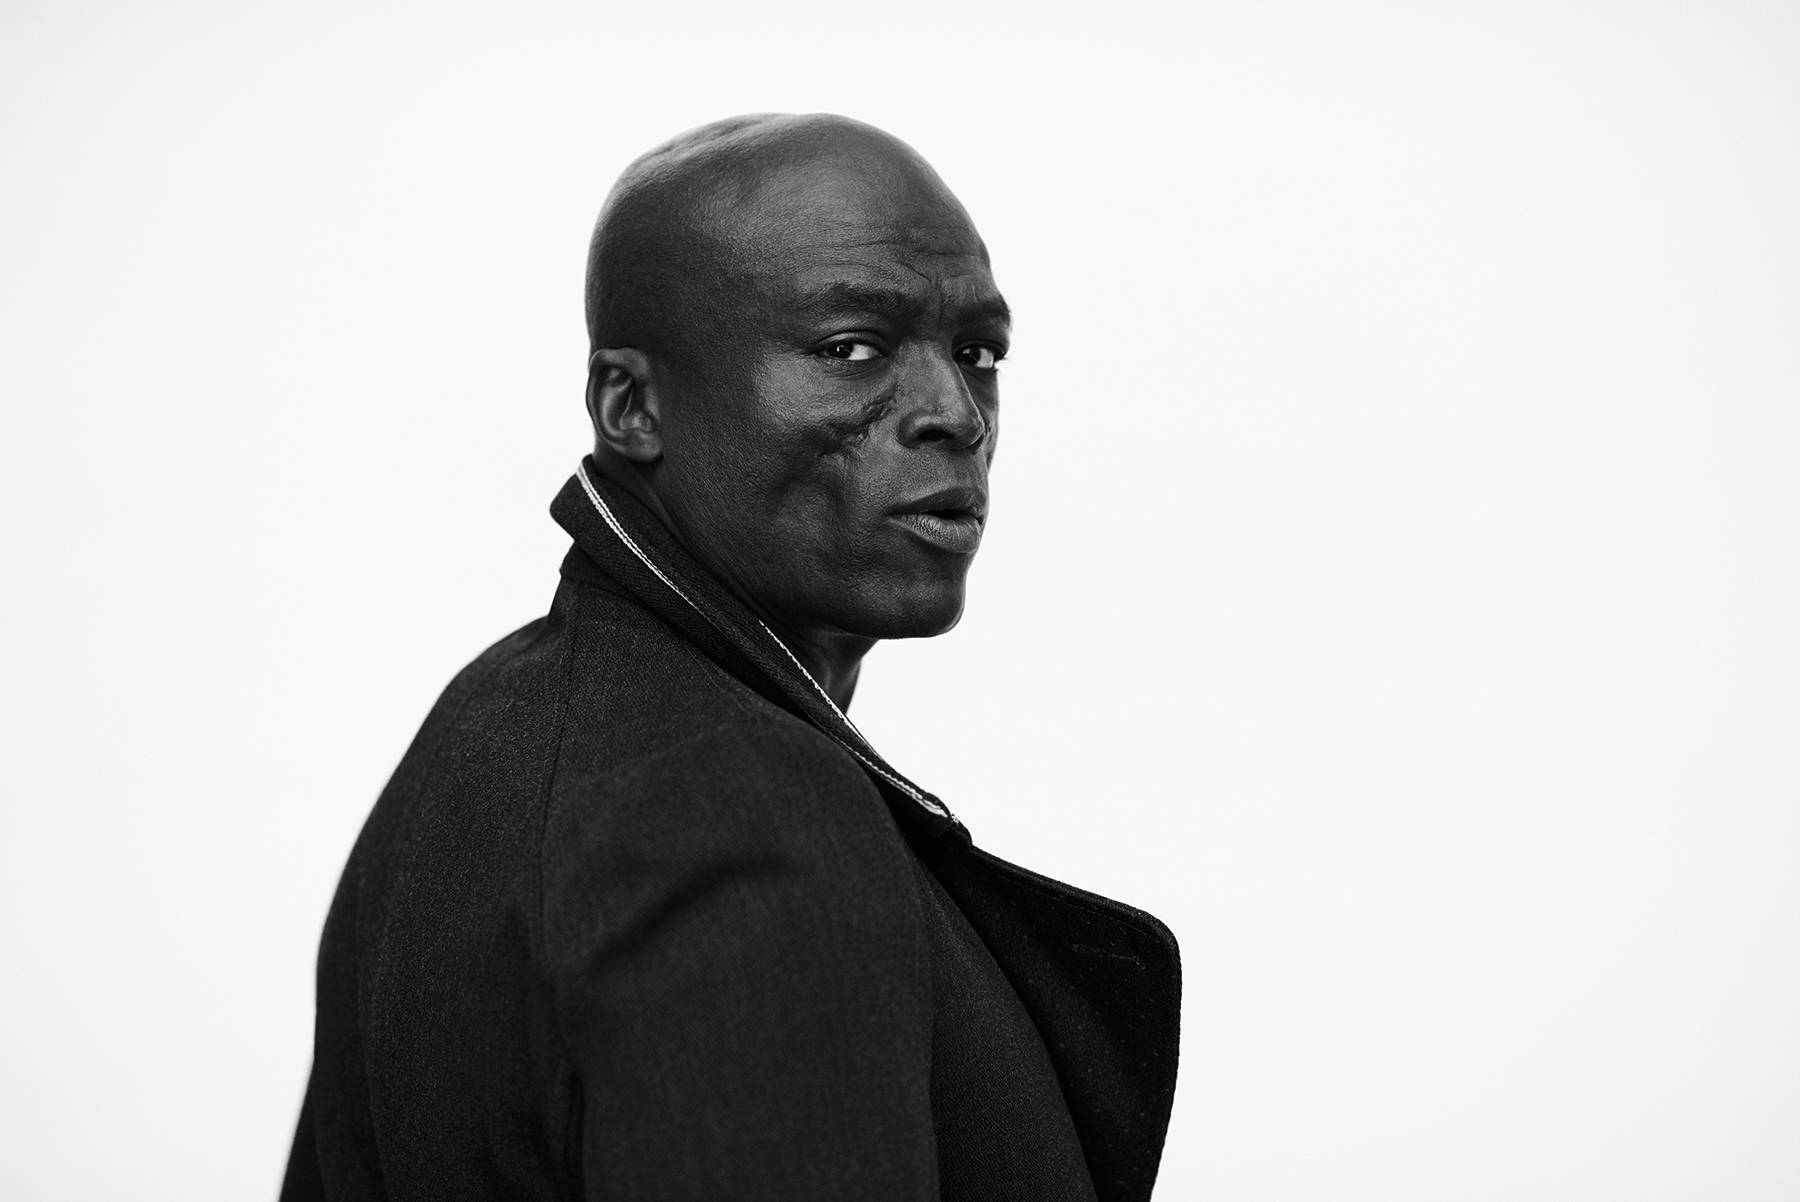 Seal’s smooth vocal delivery on hits like ‘Crazy’ and ‘Kiss from a Rose’ quickly cemented his status as a formidable singer, and over the years hes extended his influence with a wide catalog of original music and soulful covers. COURTESY PHOTO